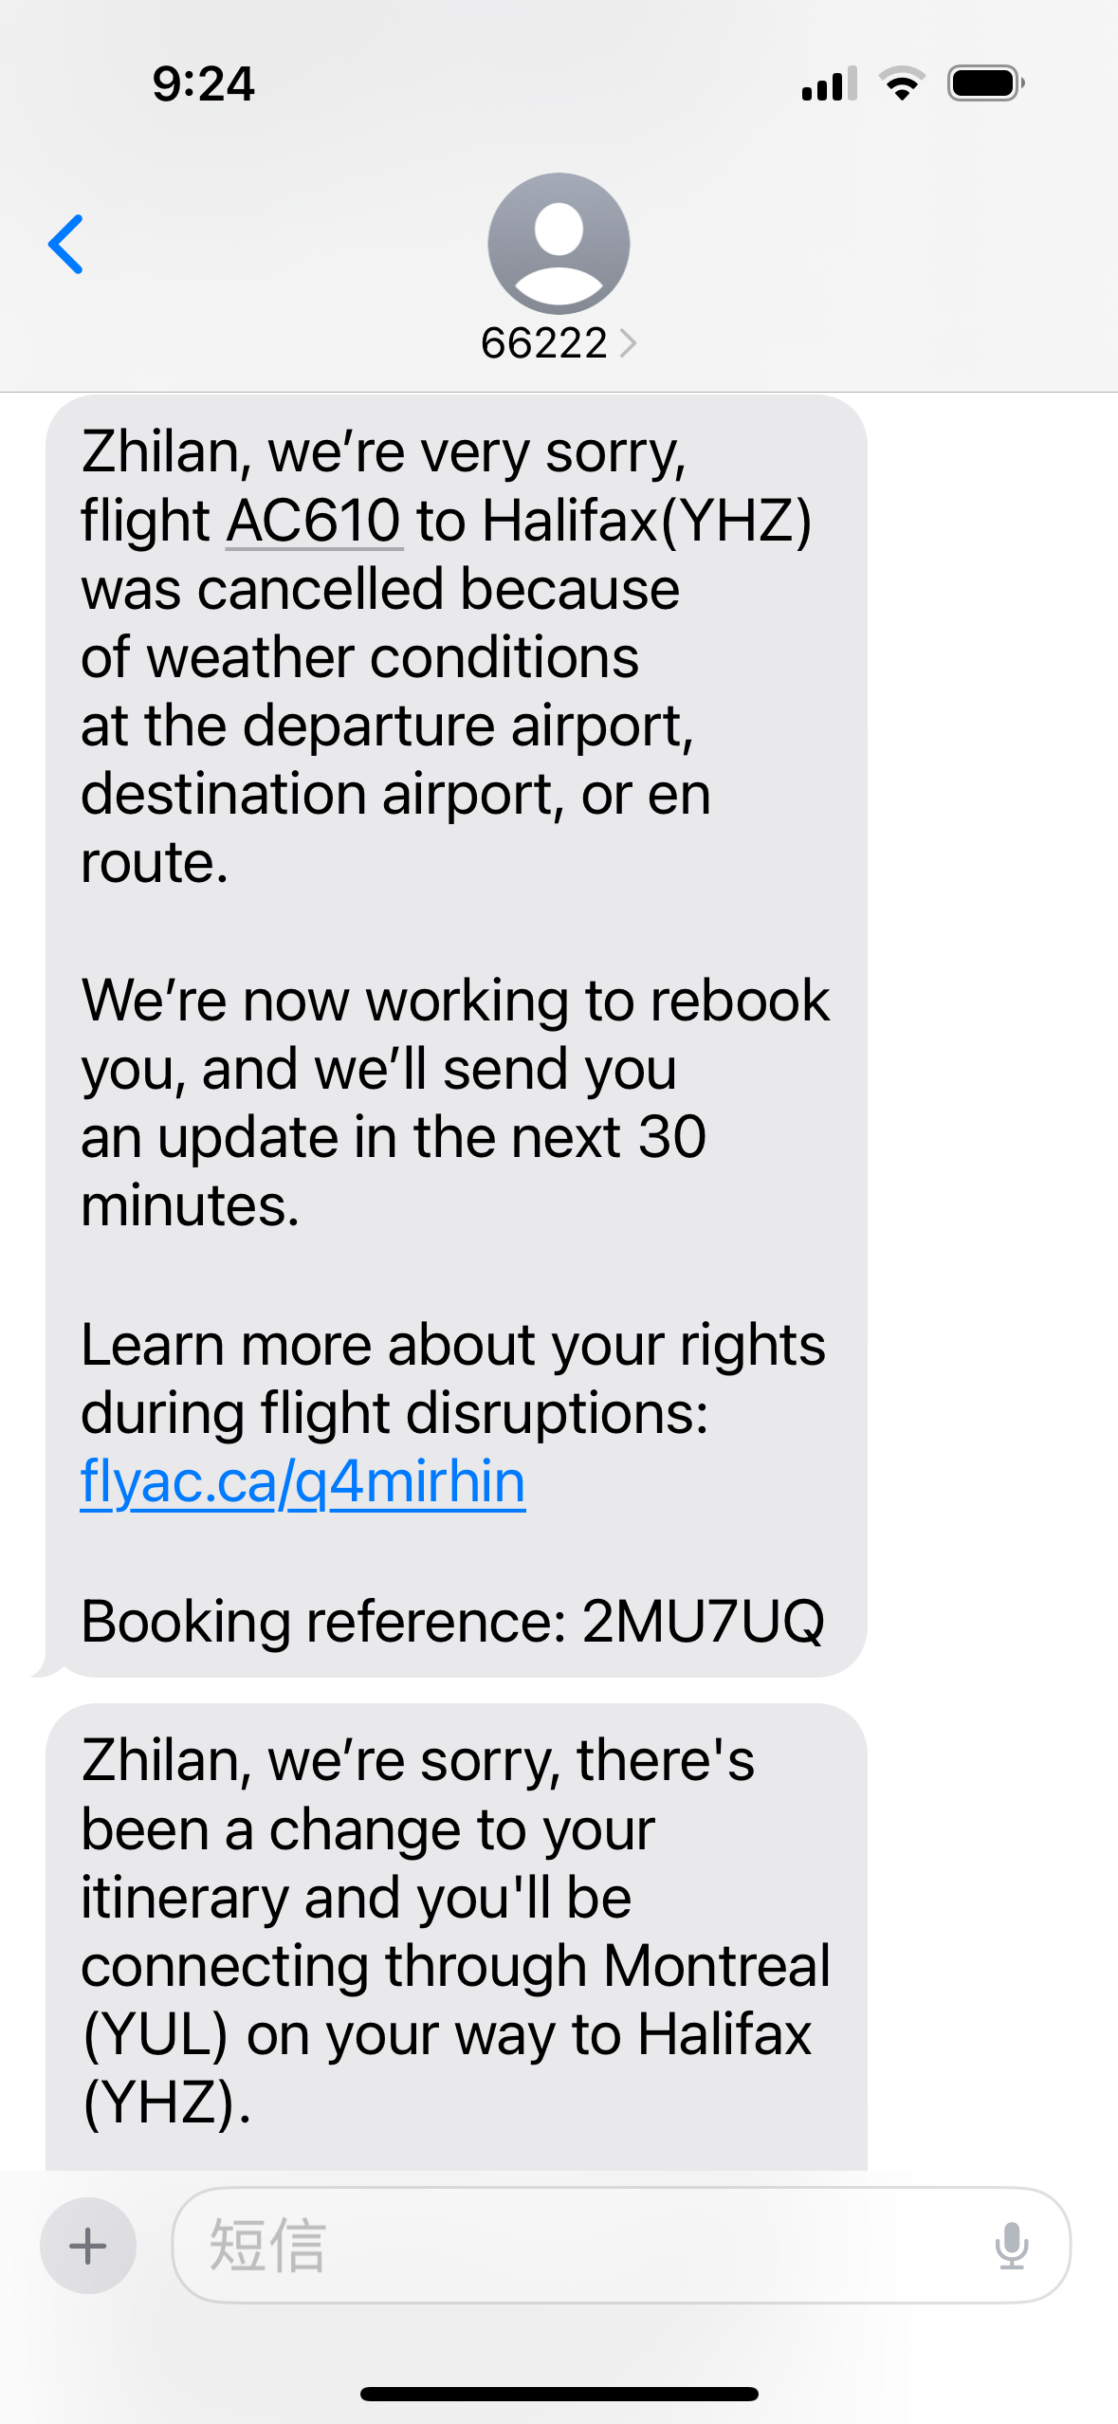 A message screenshot said the flight was cancelled, rebooked and connected the passenger through Montreal.